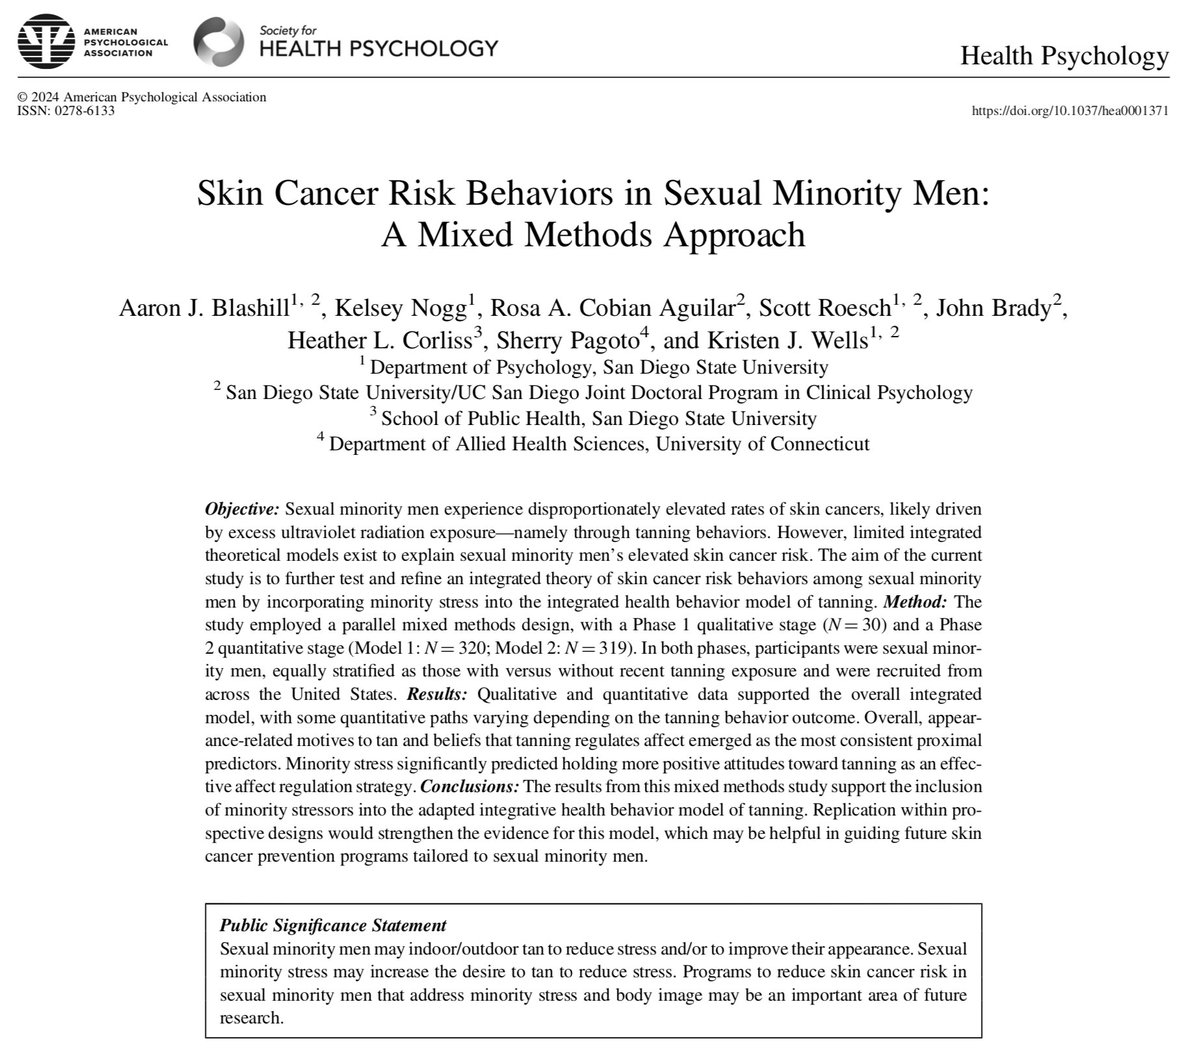 Skin cancer risk in sexual minority men, now online at Health Psychology @APADivision38: psycnet.apa.org/record/2024-73…